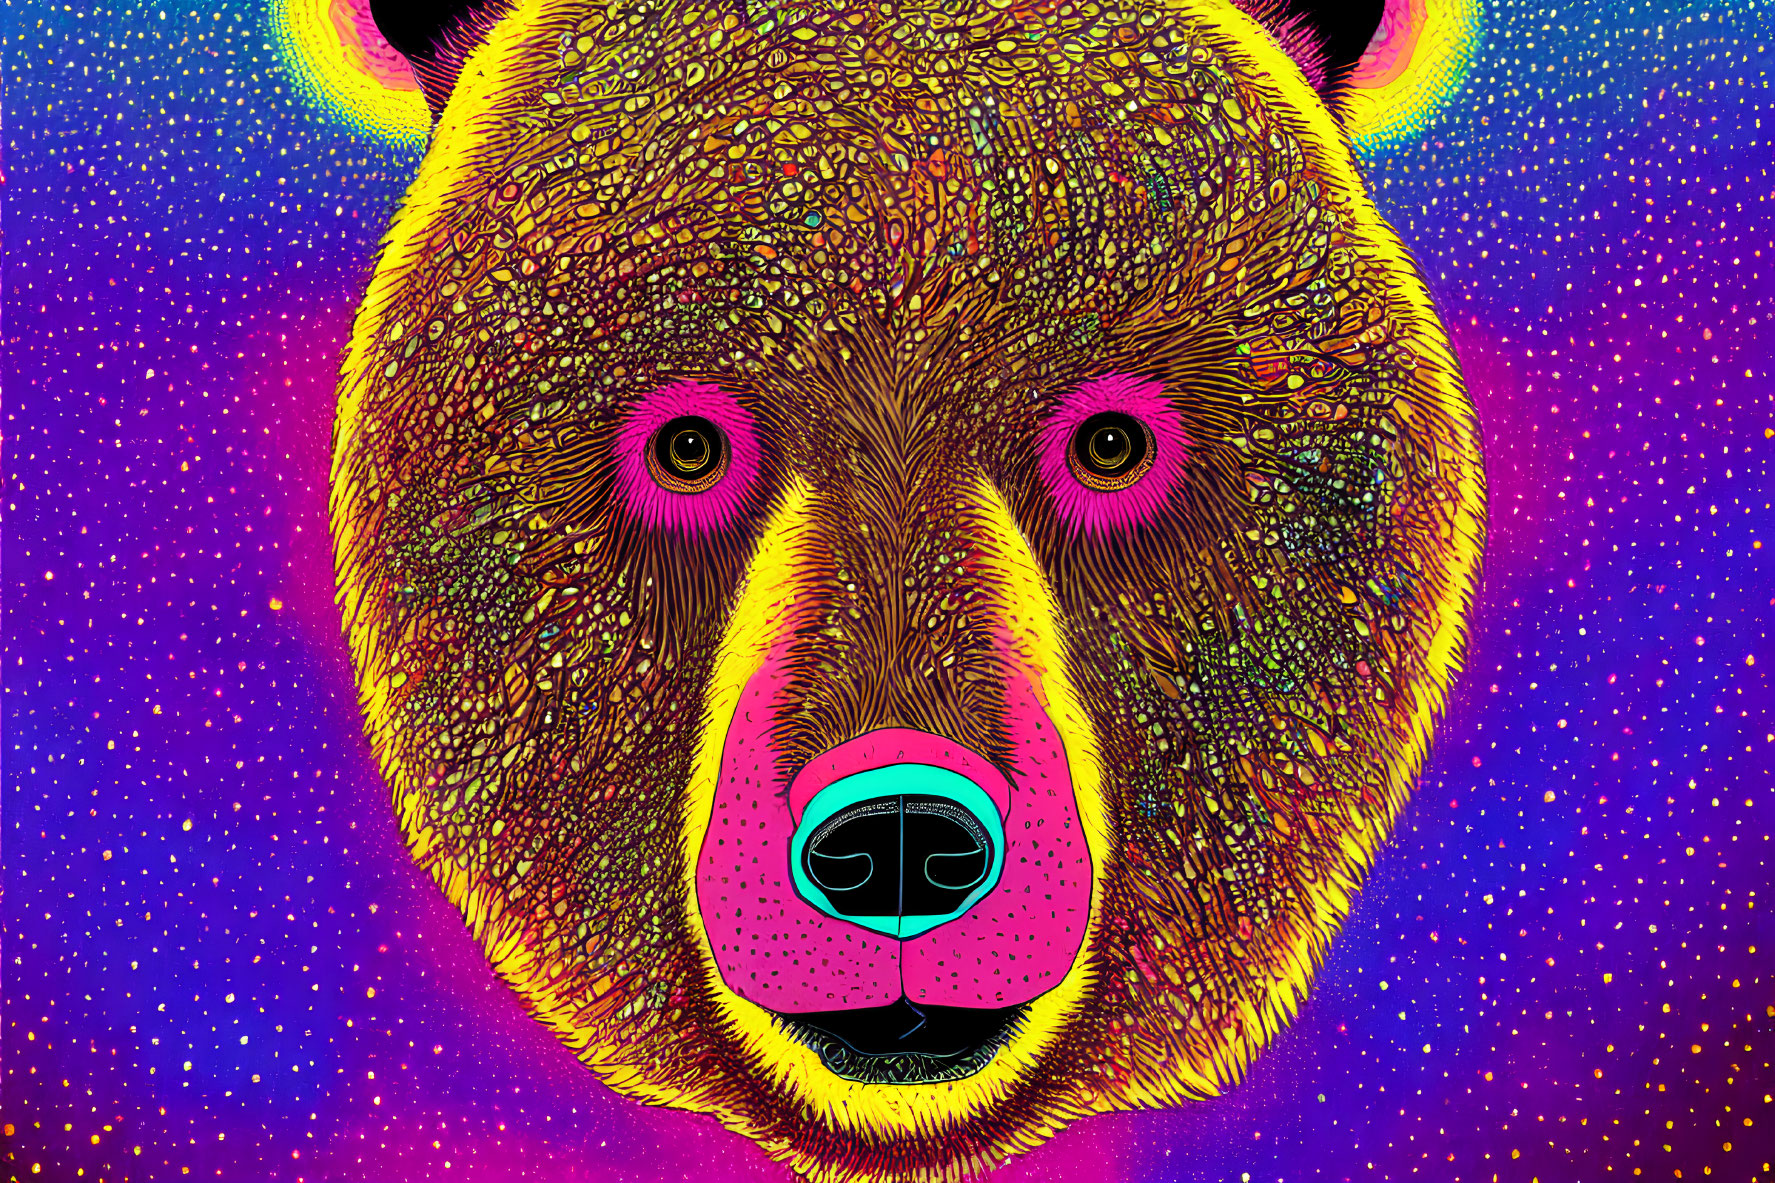 Colorful Psychedelic Bear Illustration with Neon Colors and Intricate Patterns on Starry Background